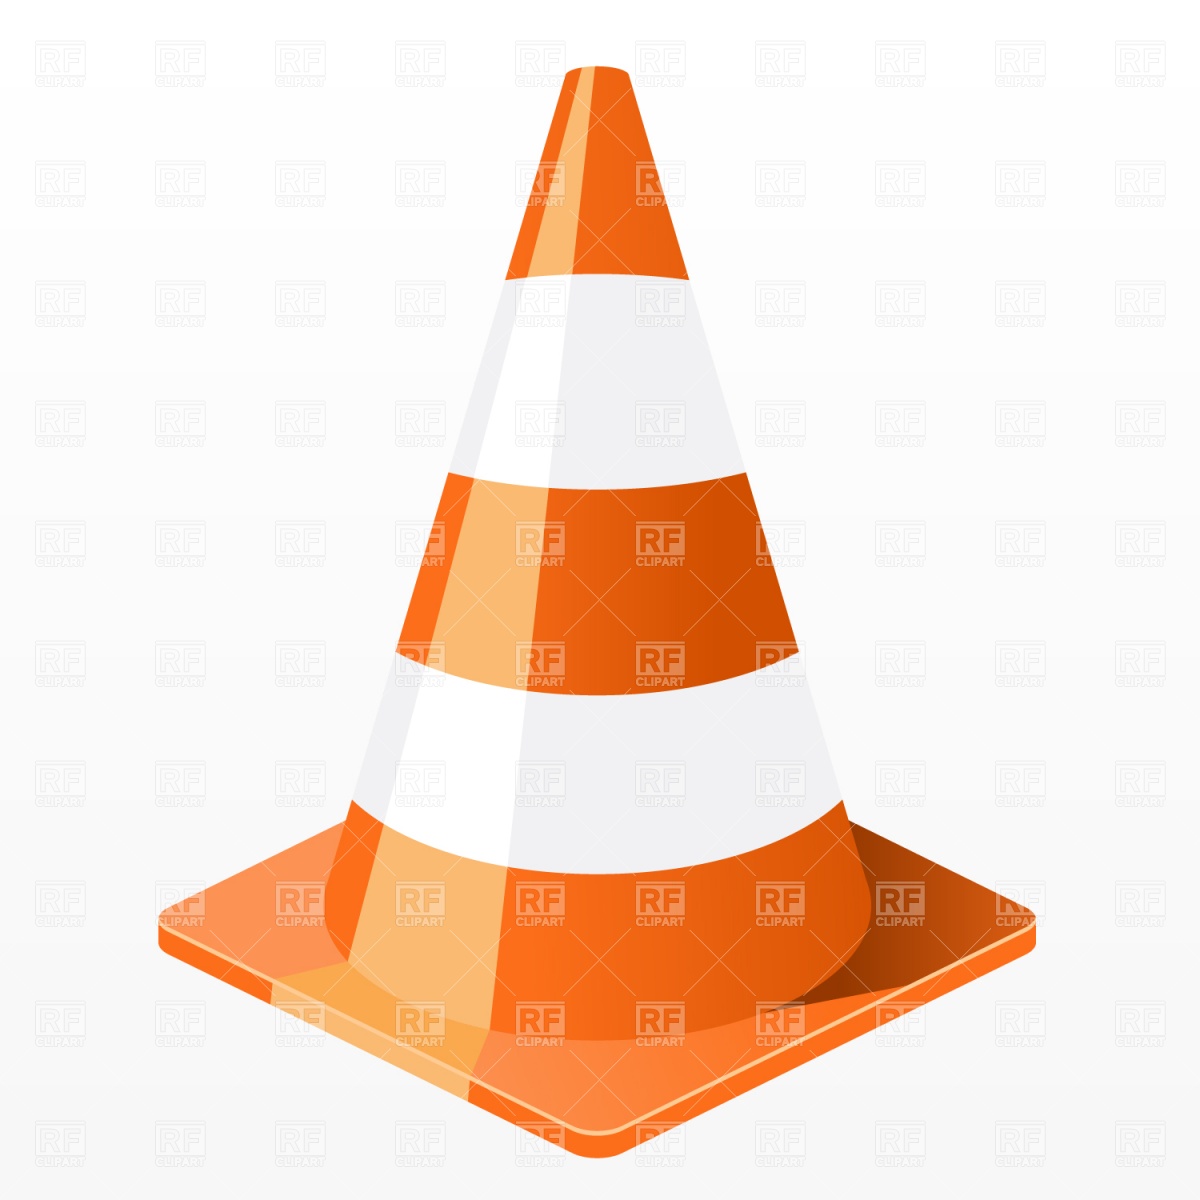 Cone 1496 Signs Symbols Maps Download Royalty Free Vector Clipart